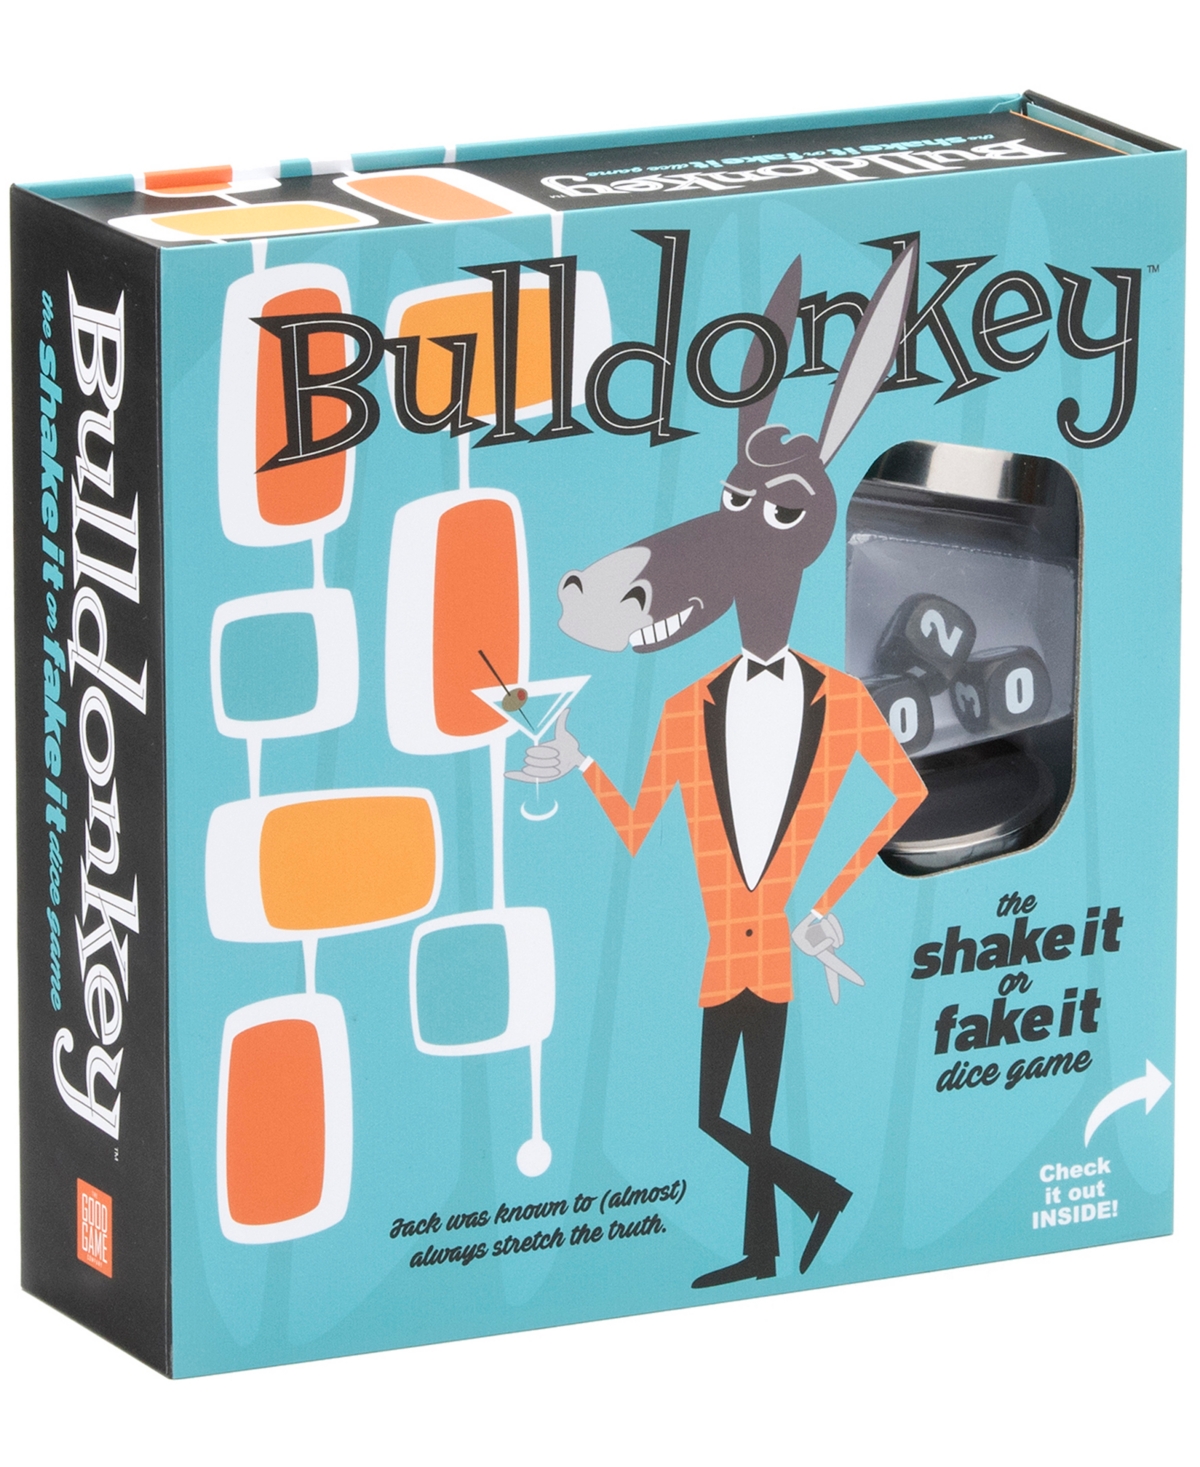 The Good Game Company Bulldonkey In No Color